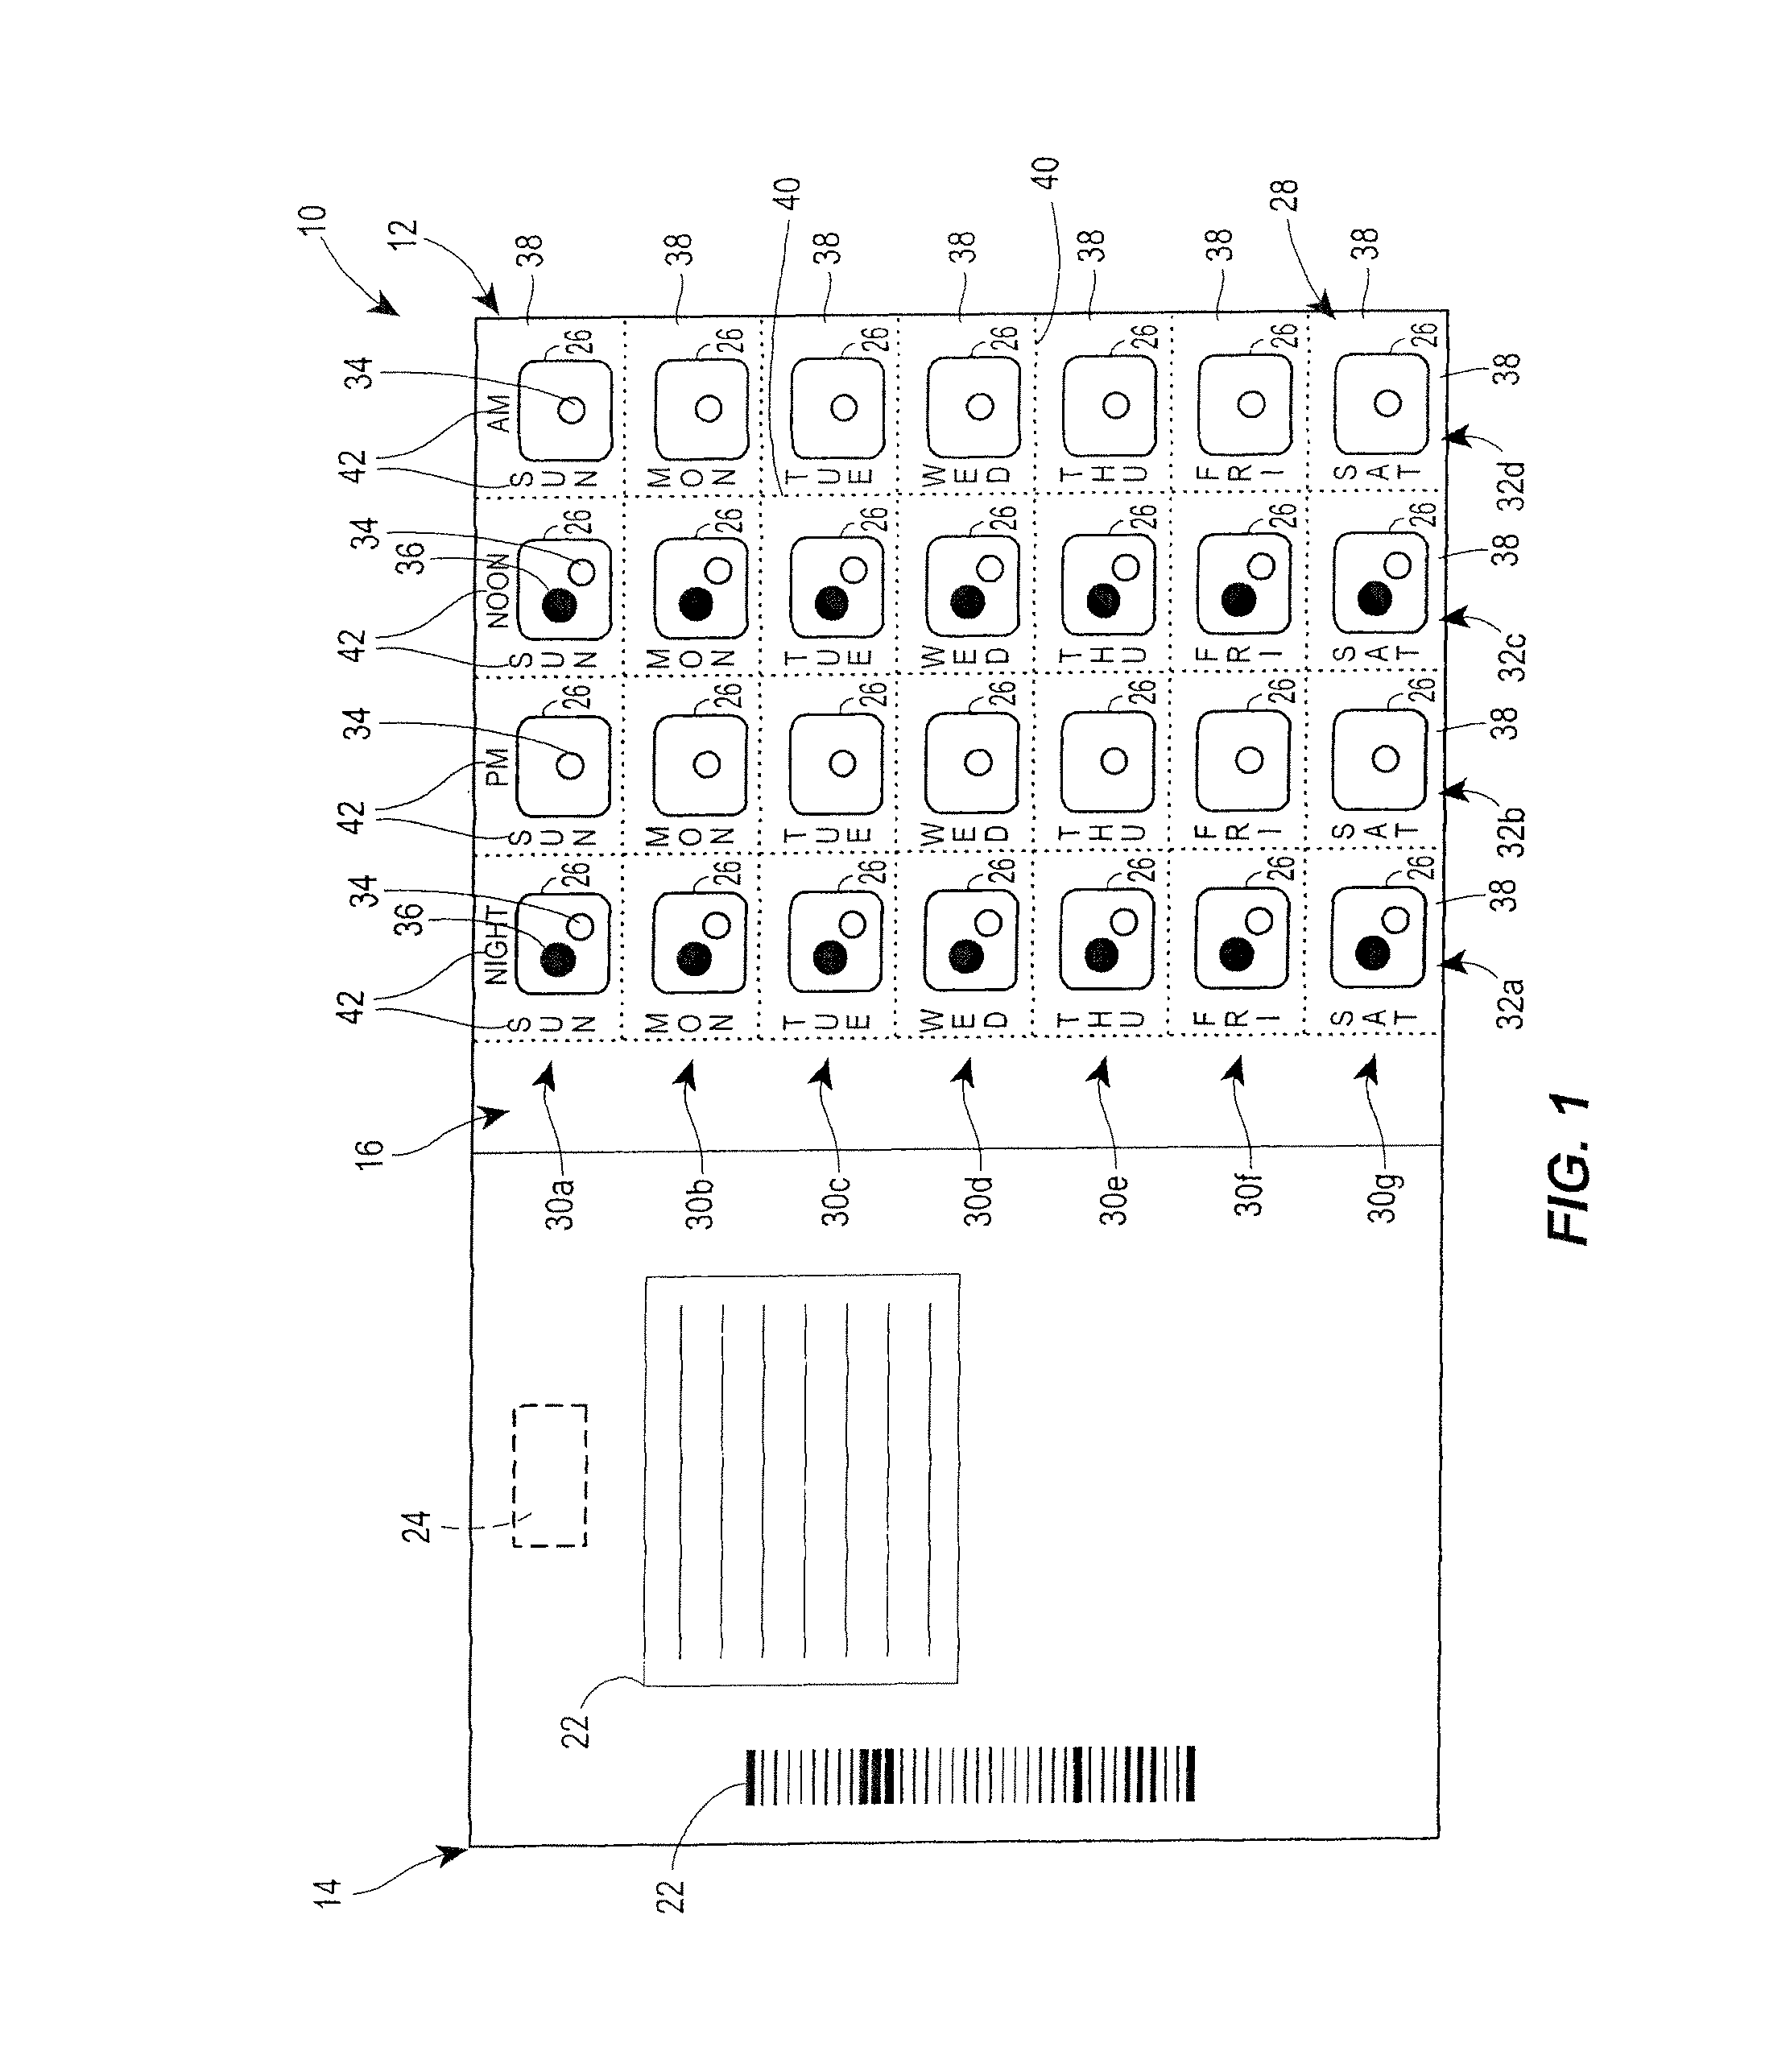 Method and system for verification of contents of a multi-cell, multi-product blister pack